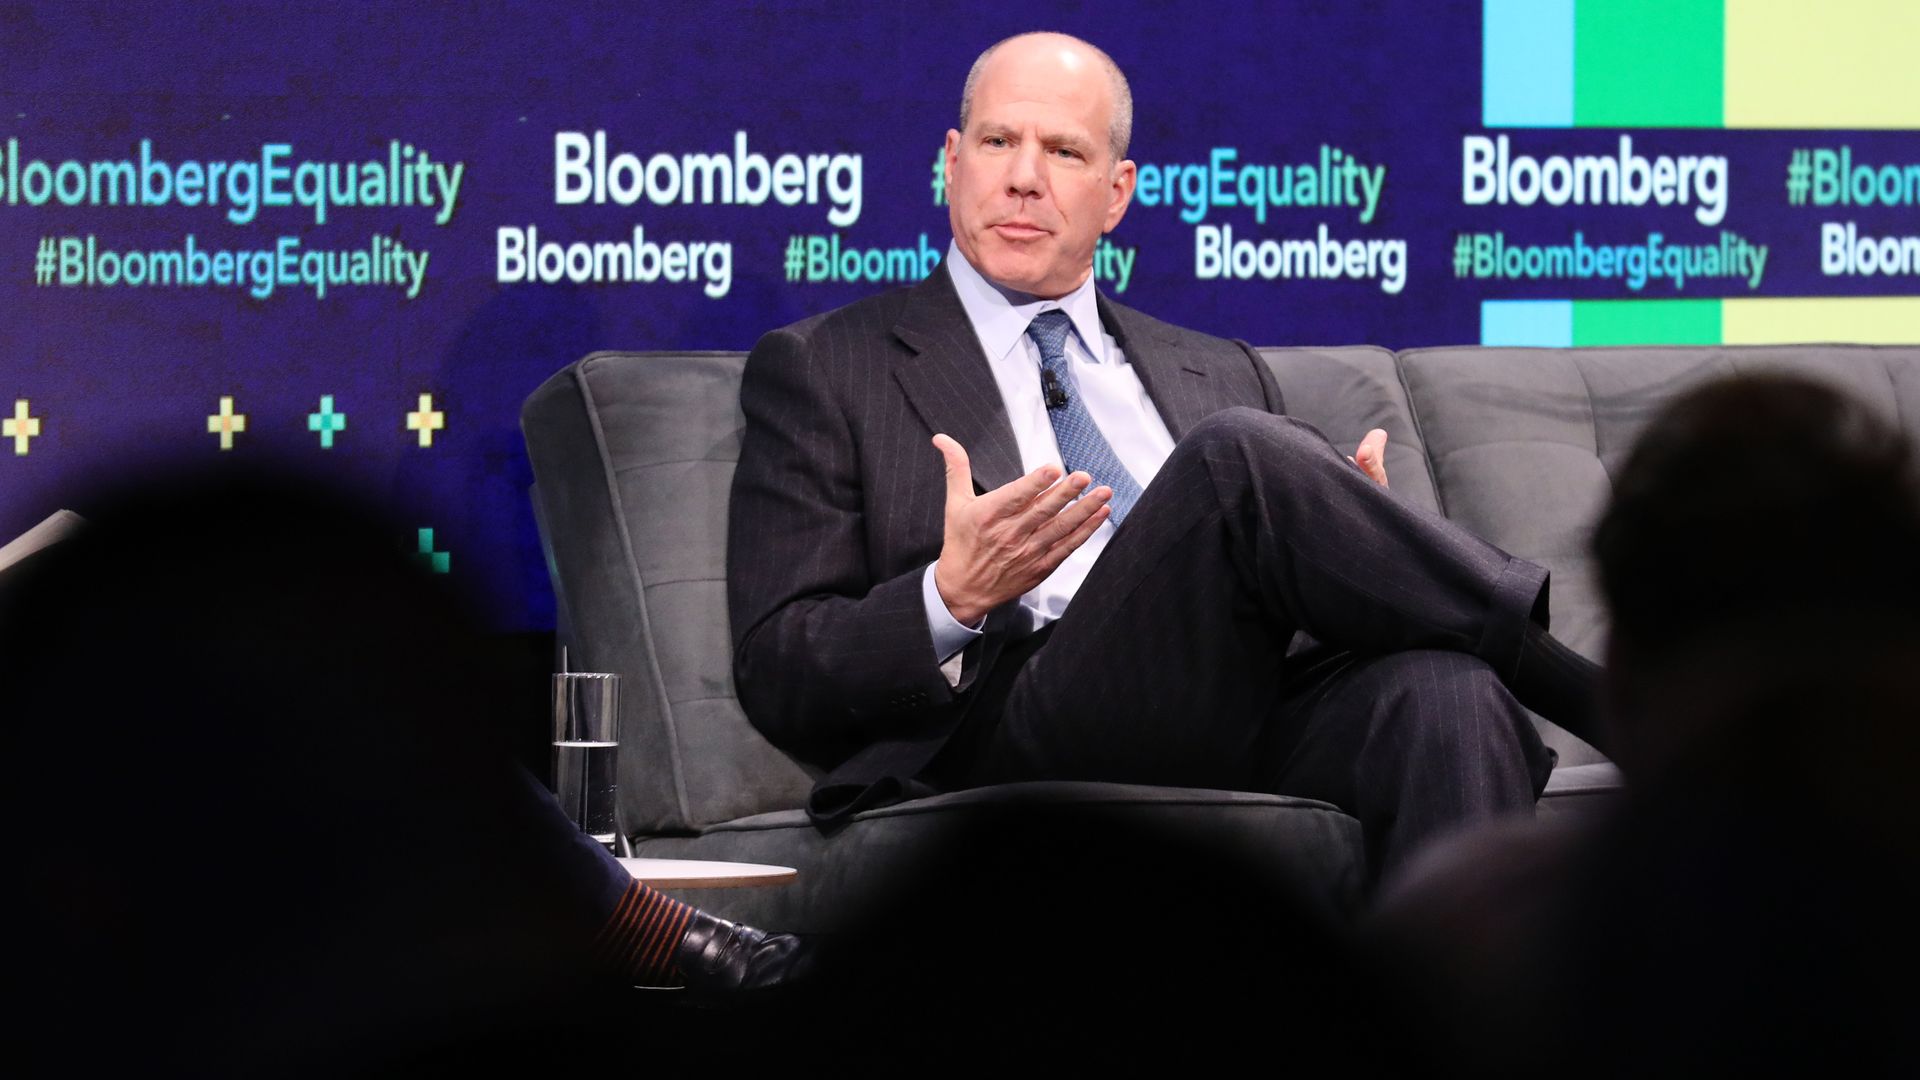 Jon Winkelried, co-chief executive officer and partner of TPG Capital LP, speaks during the Bloomberg Equality Summit in New York, U.S., on Wednesday, March 27, 2019. 